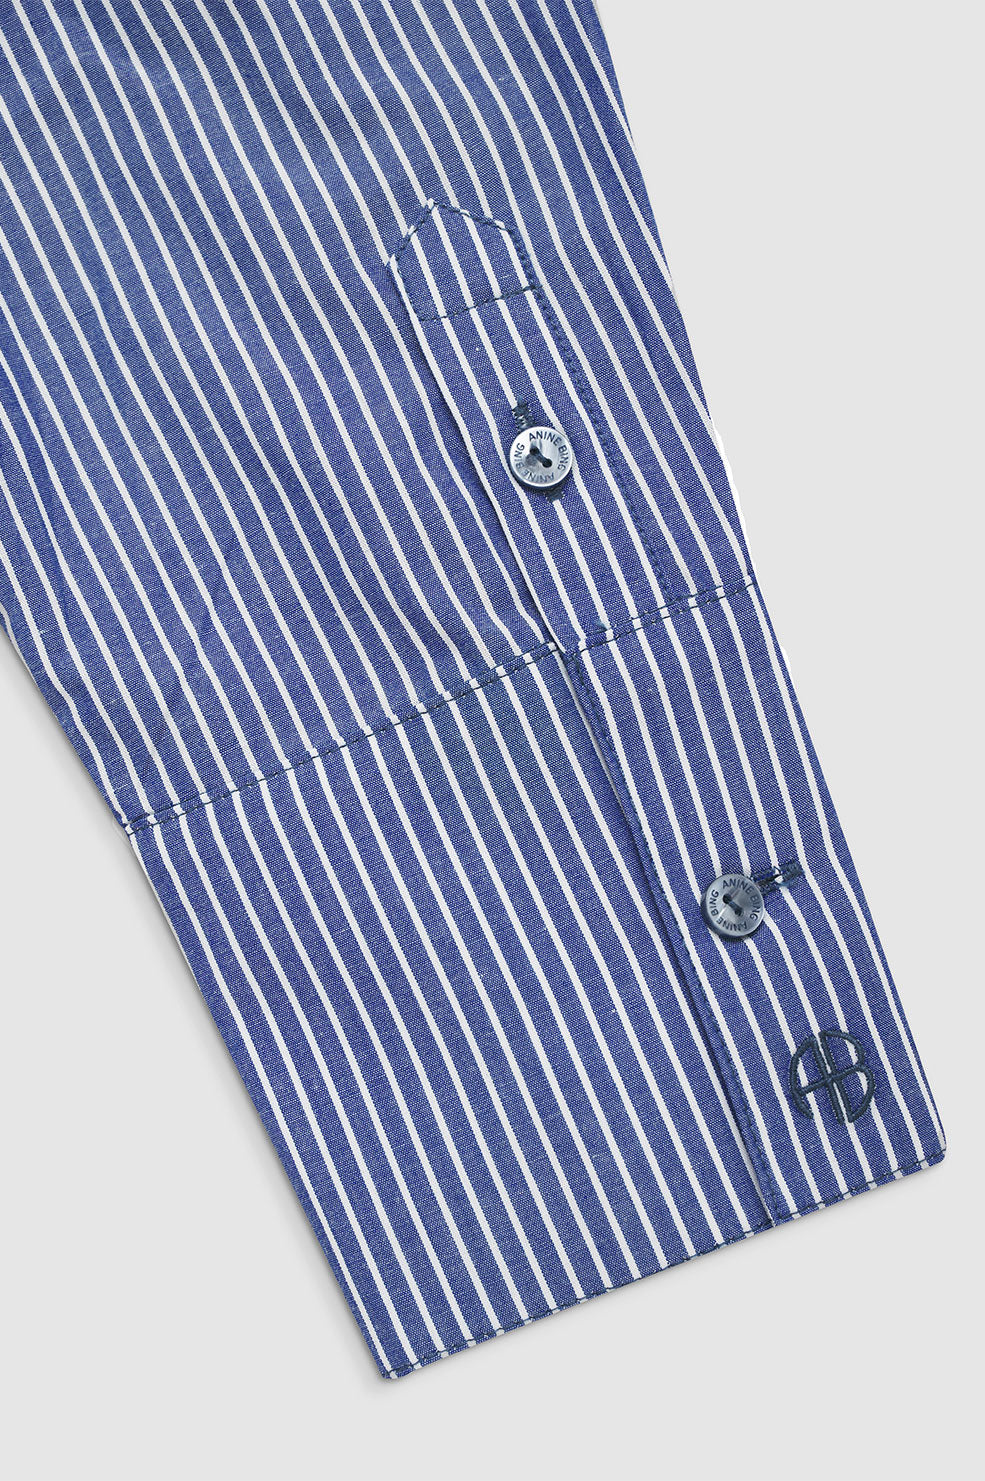 ANINE BING Mika Shirt - Blue And White Stripe - Second Detail View